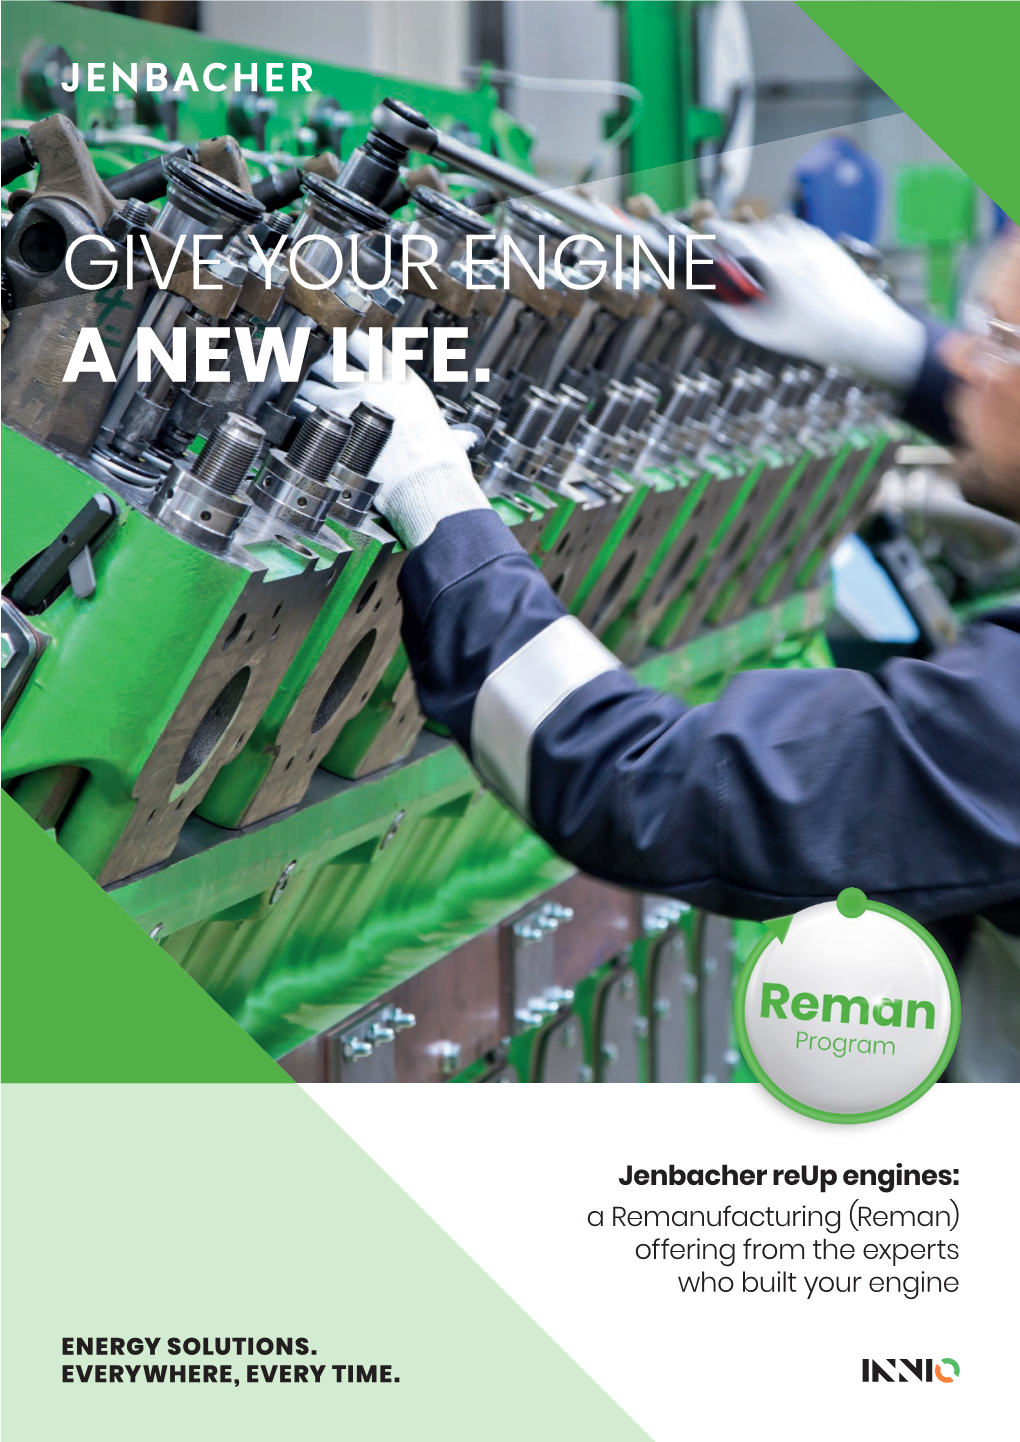 Jenbacher Reup Engines: a Remanufacturing (Reman) Offering from the Experts Who Built Your Engine